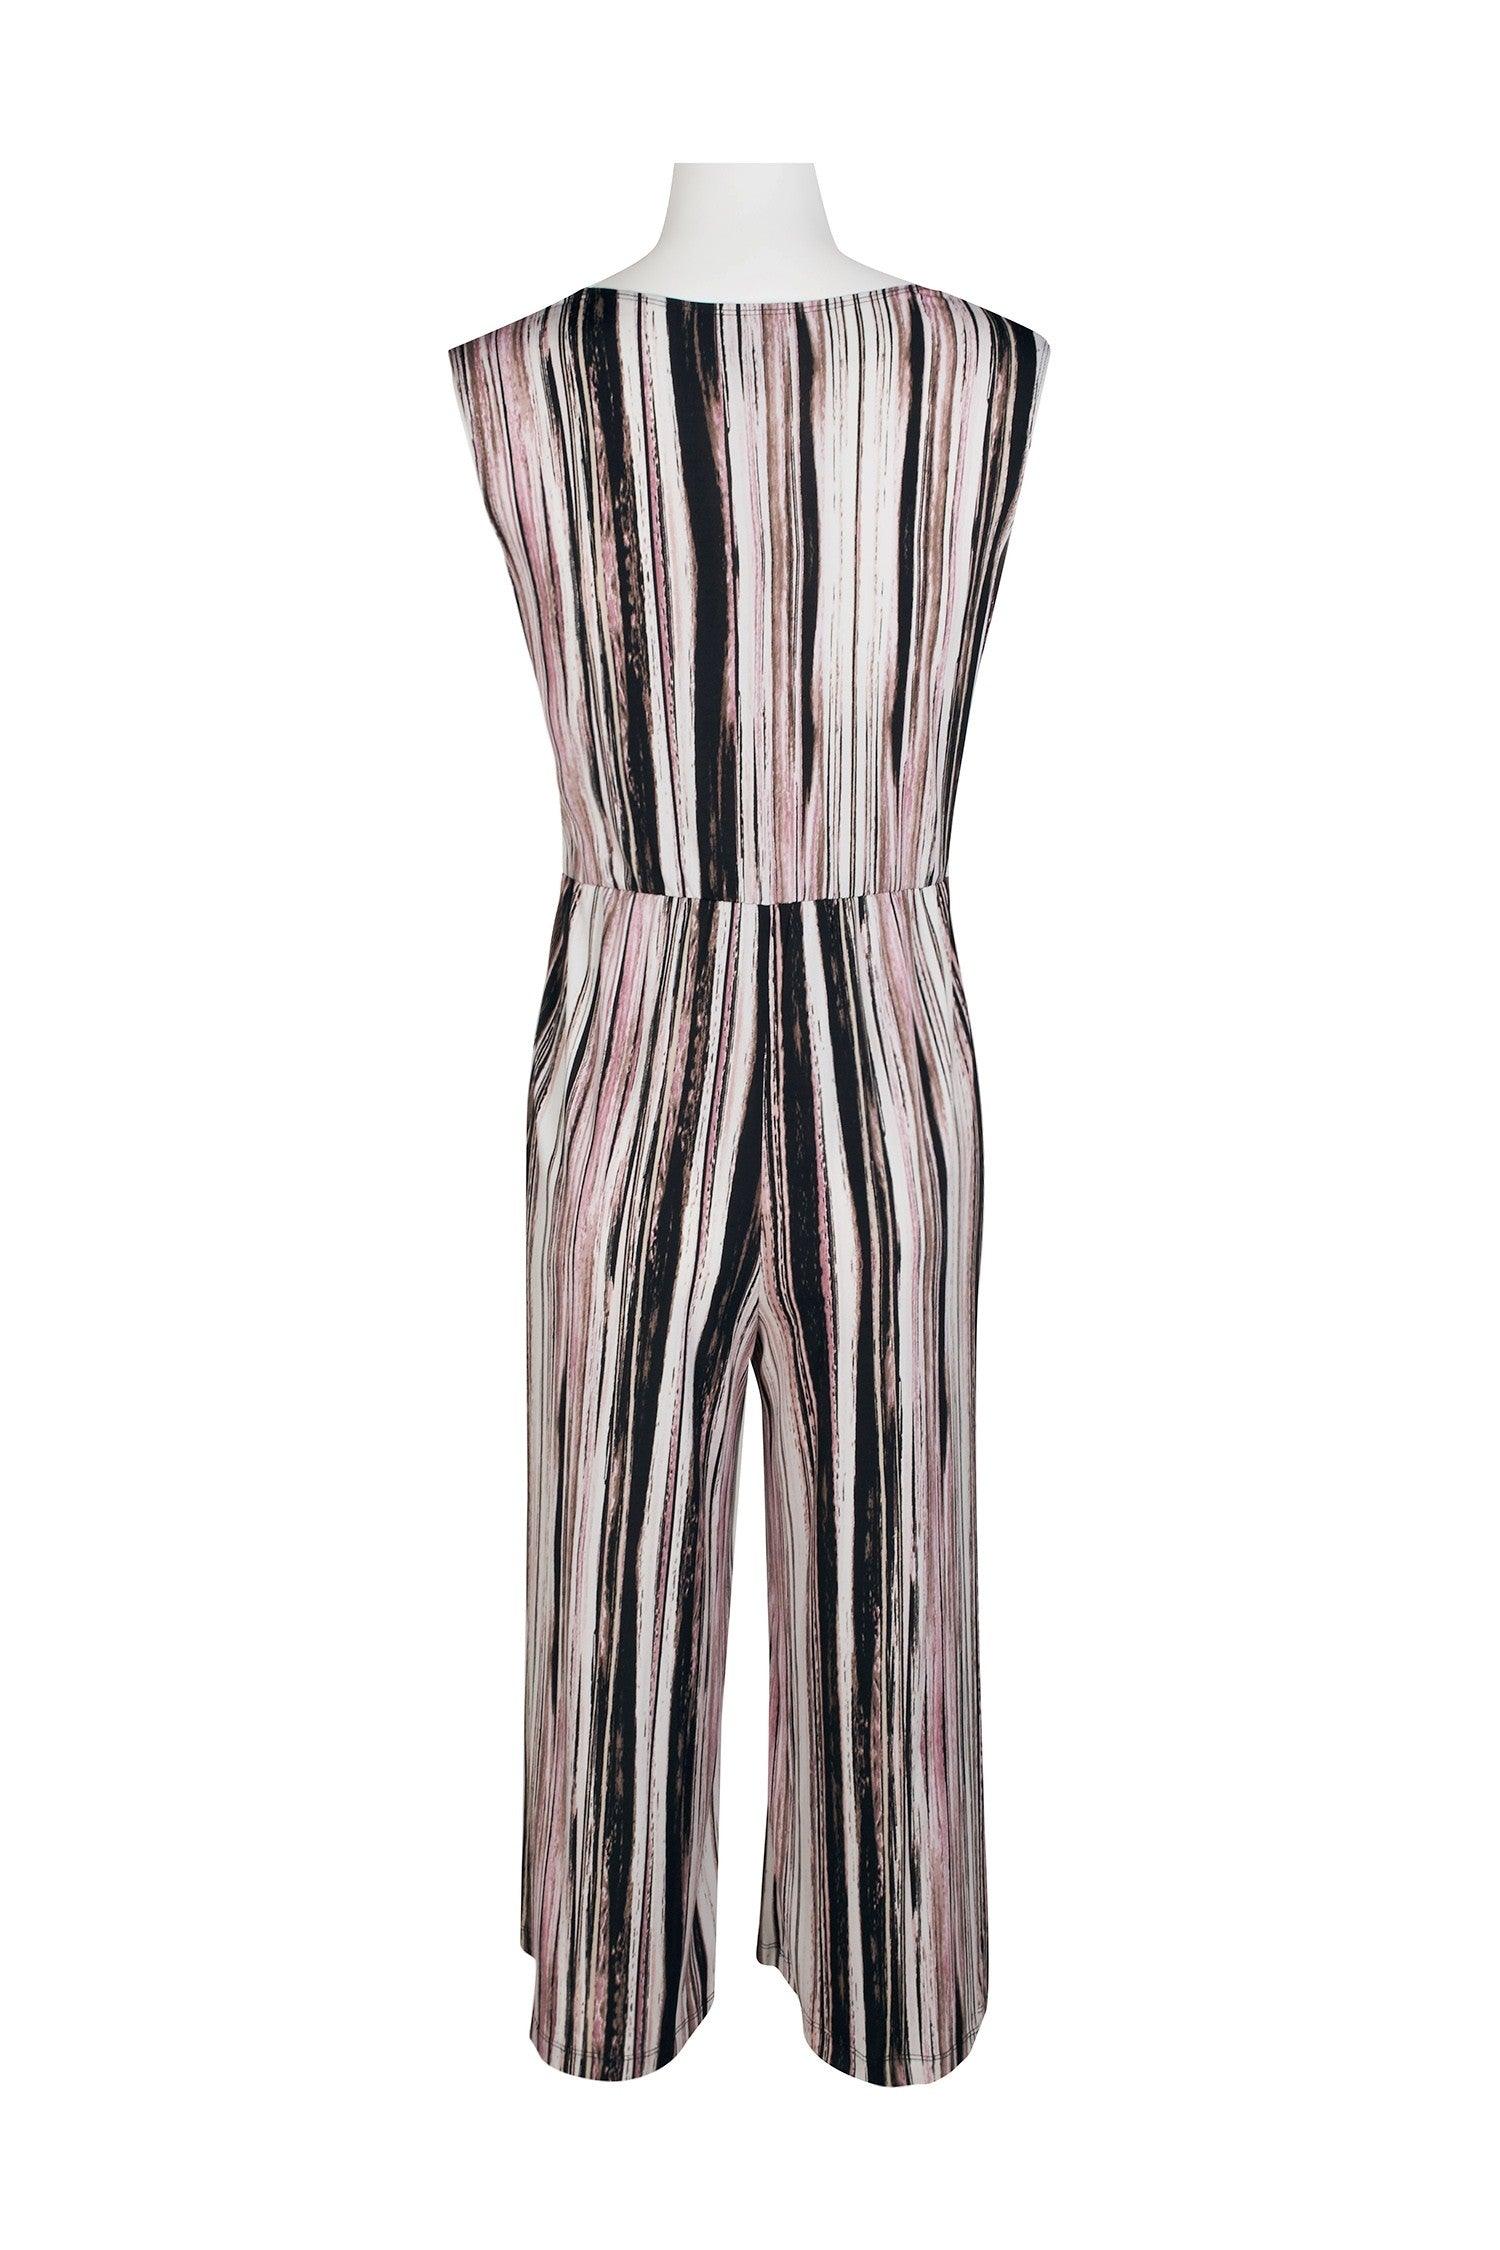 Connected Apparel Multi Print Jumpsuit - The Dress Outlet